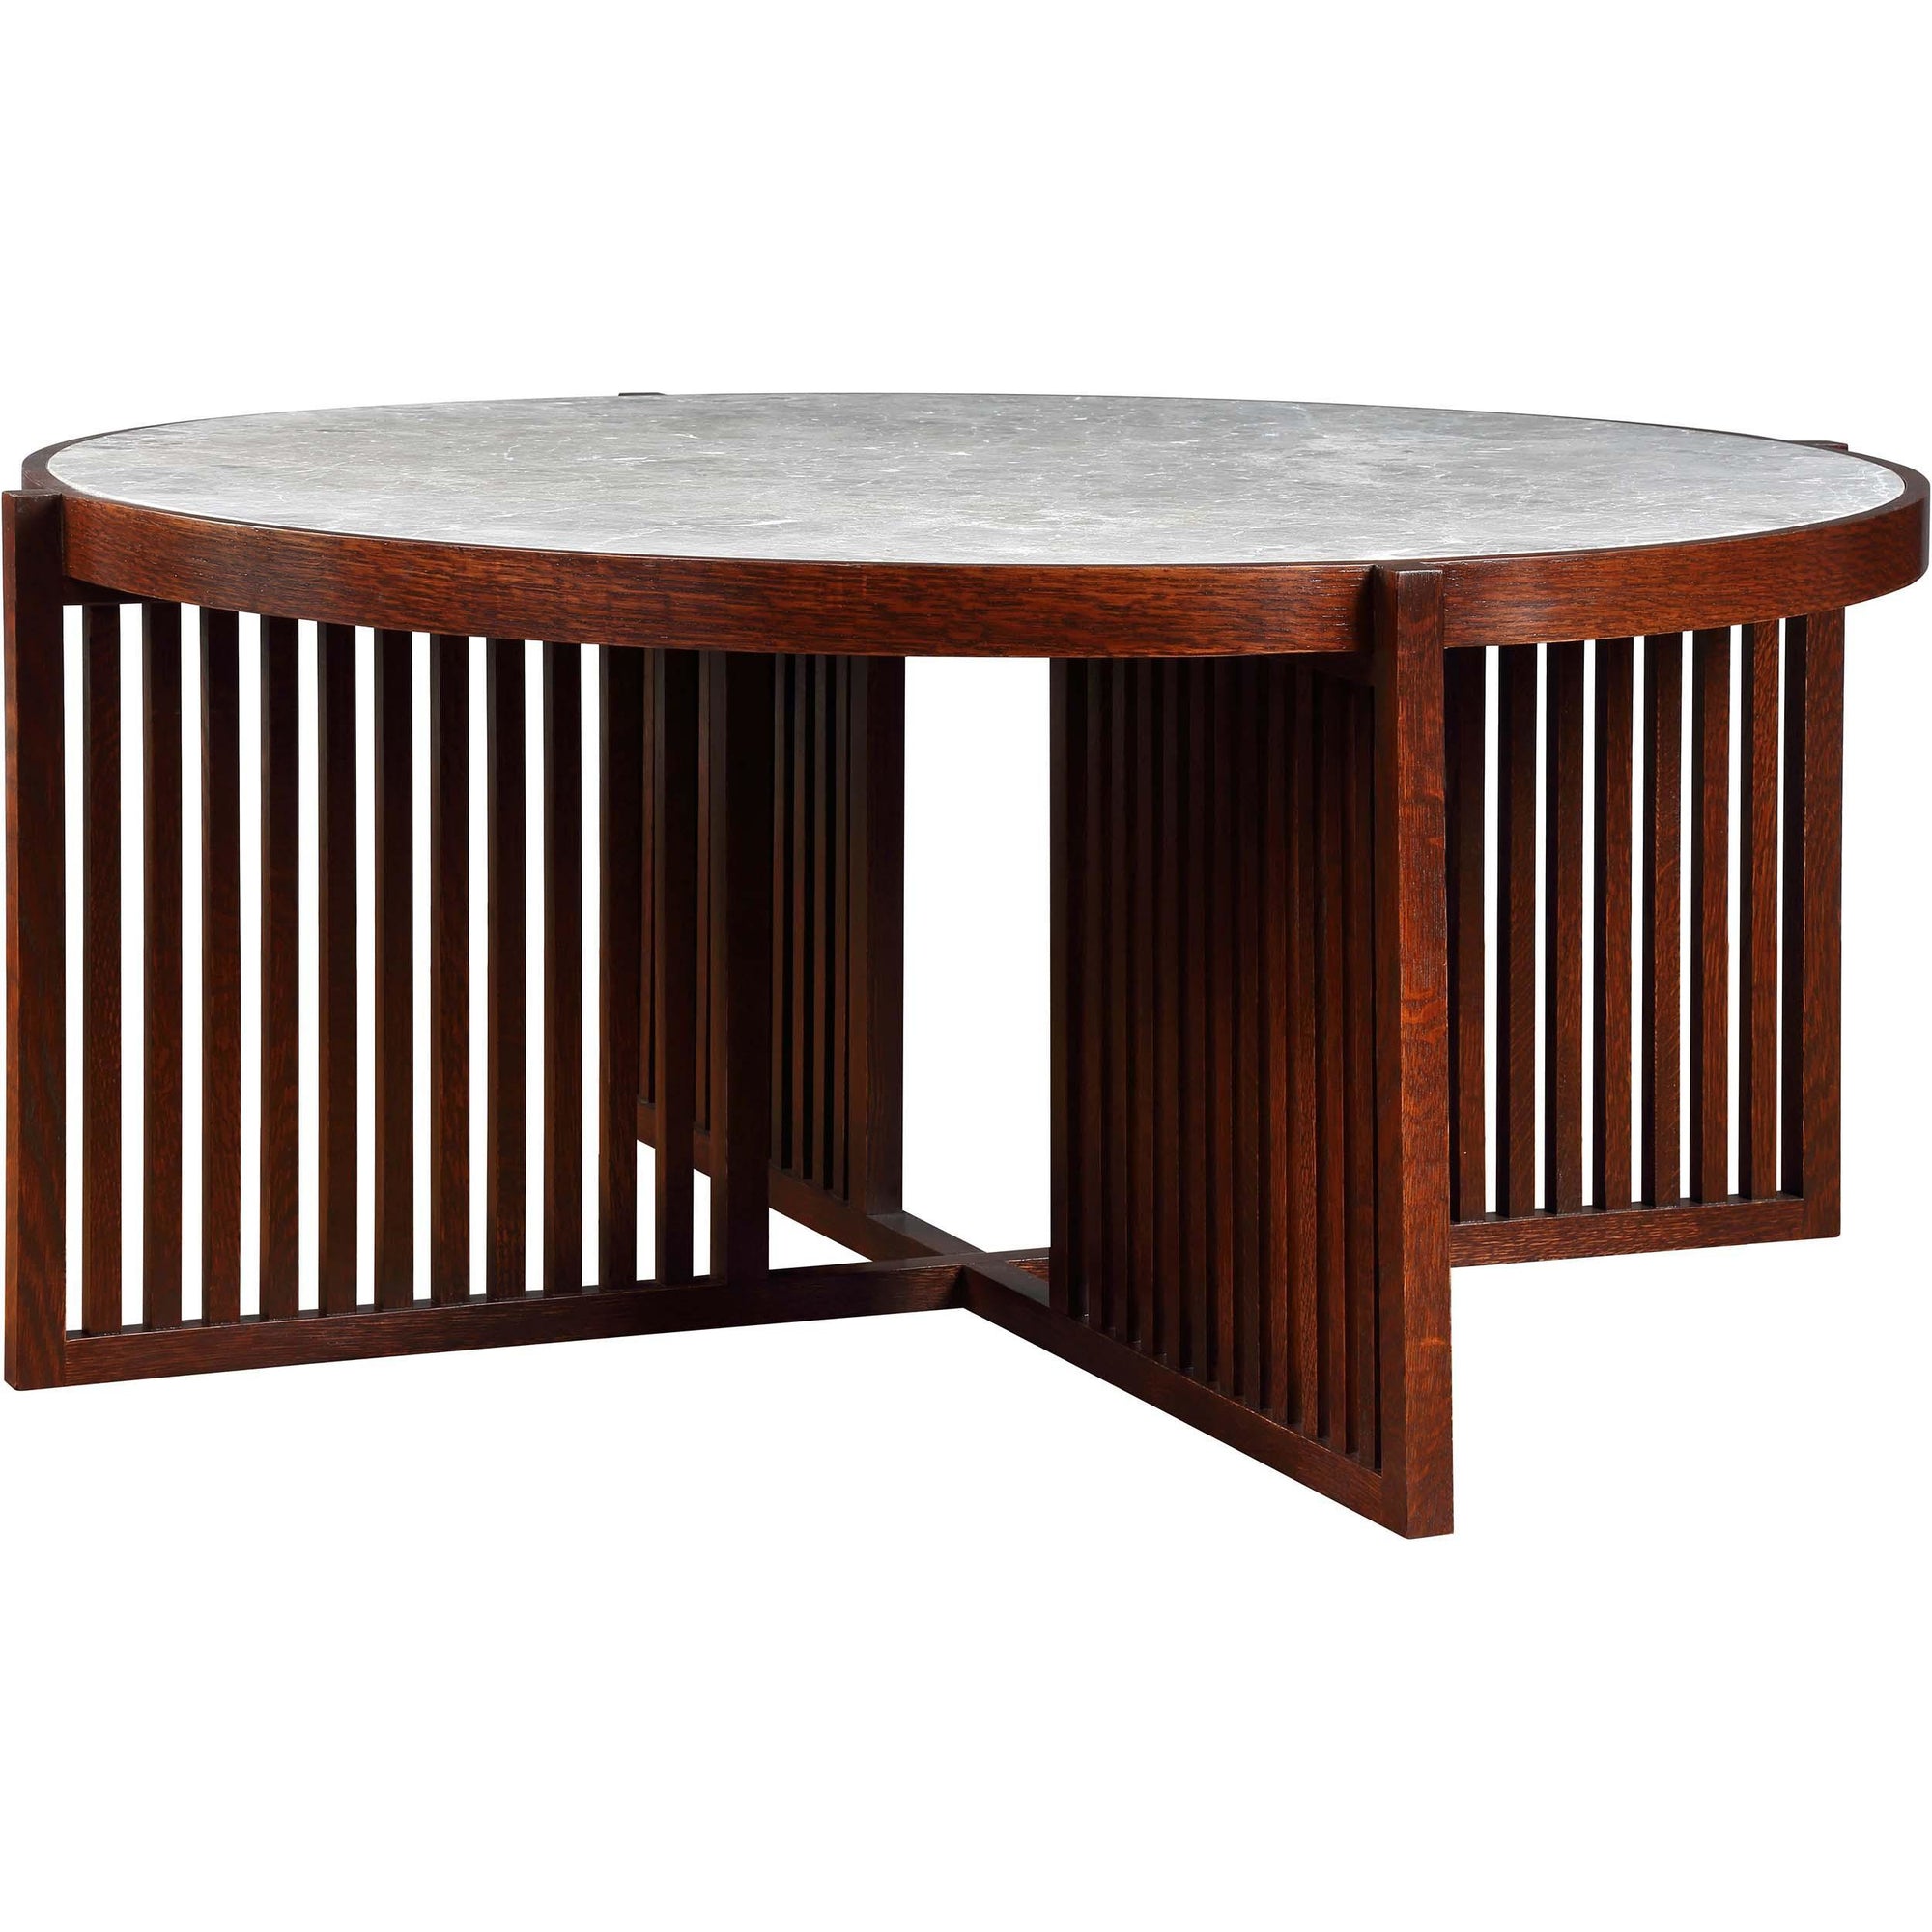 Park Slope Round Cocktail Table